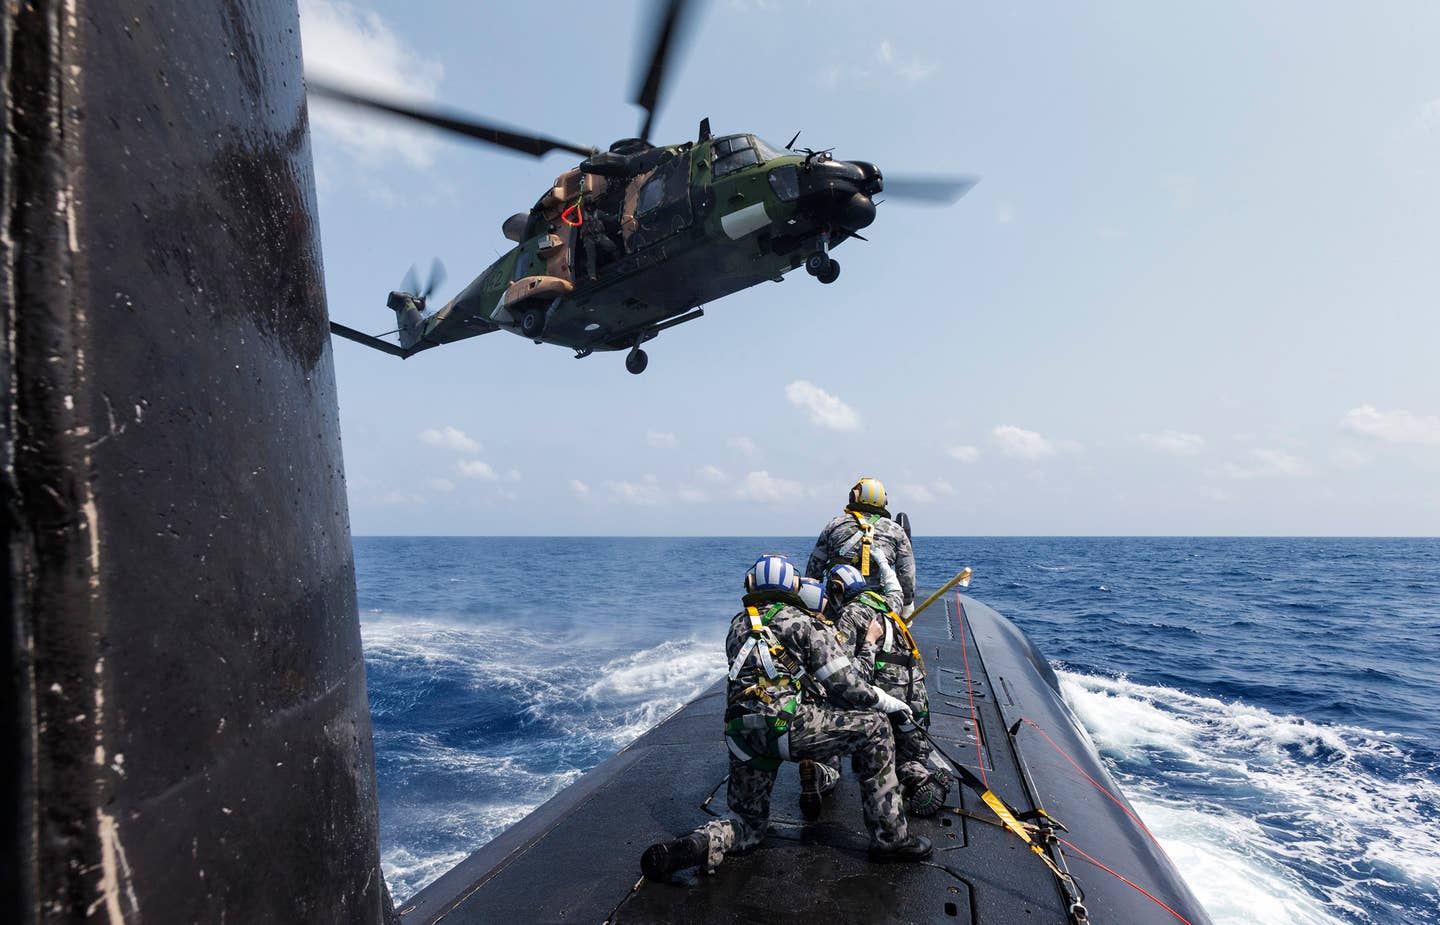 A team of Royal Australian Navy submariners on board HMAS <em>Collins</em> await a winch from an MRH90 helicopter during a personnel transfer while sailing in the Bay of Bengal as part of AUSINDEX 2019. <em>COMMONWEALTH OF AUSTRALIA, DEPARTMENT OF DEFENSE</em>